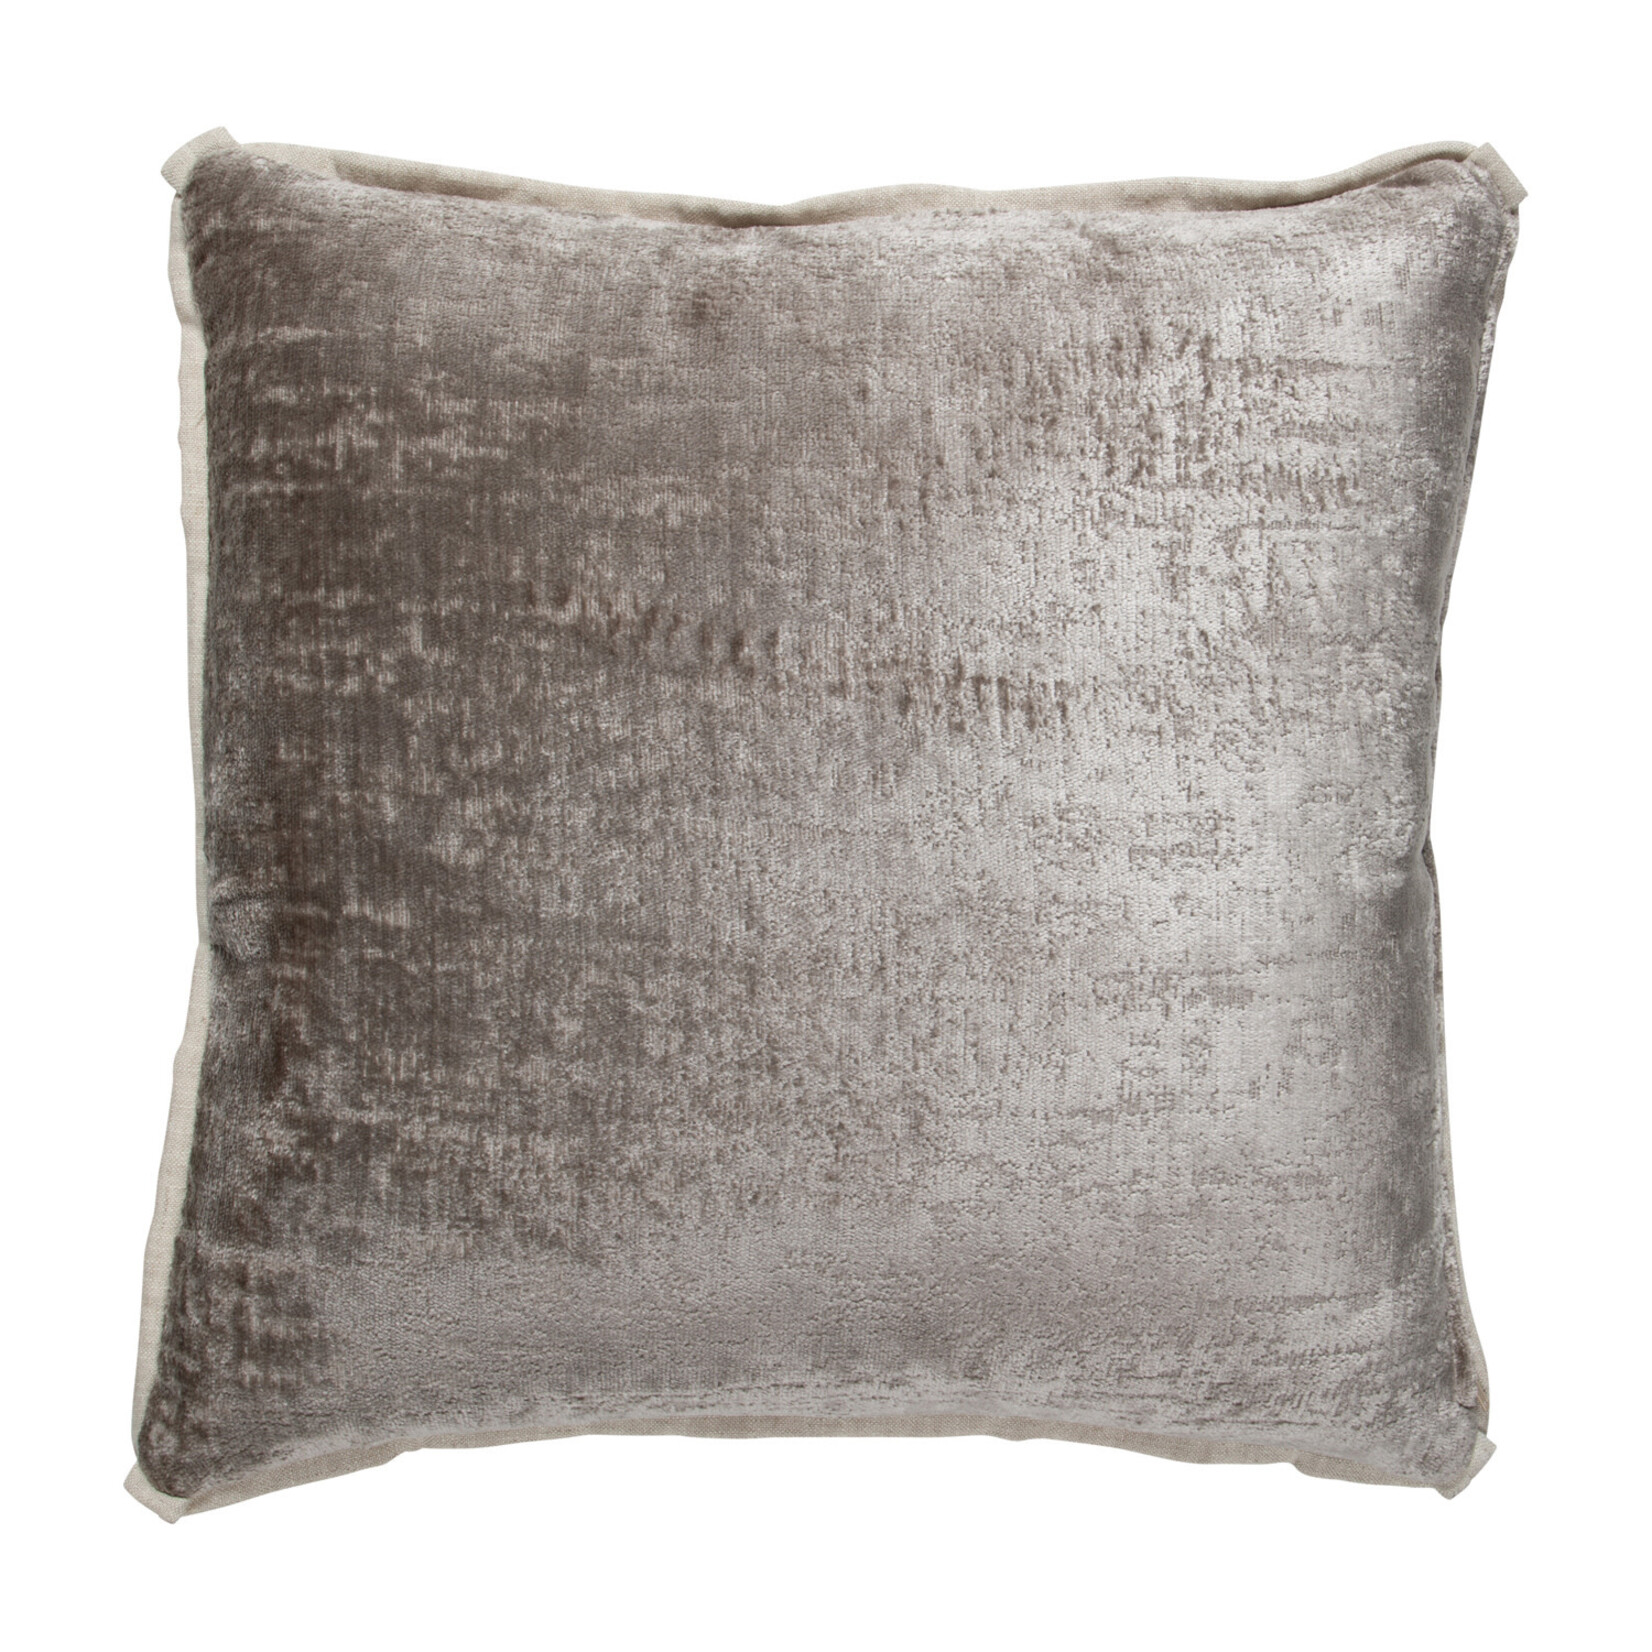 Gabby Lizette Pillow with Feather Insert 18x18